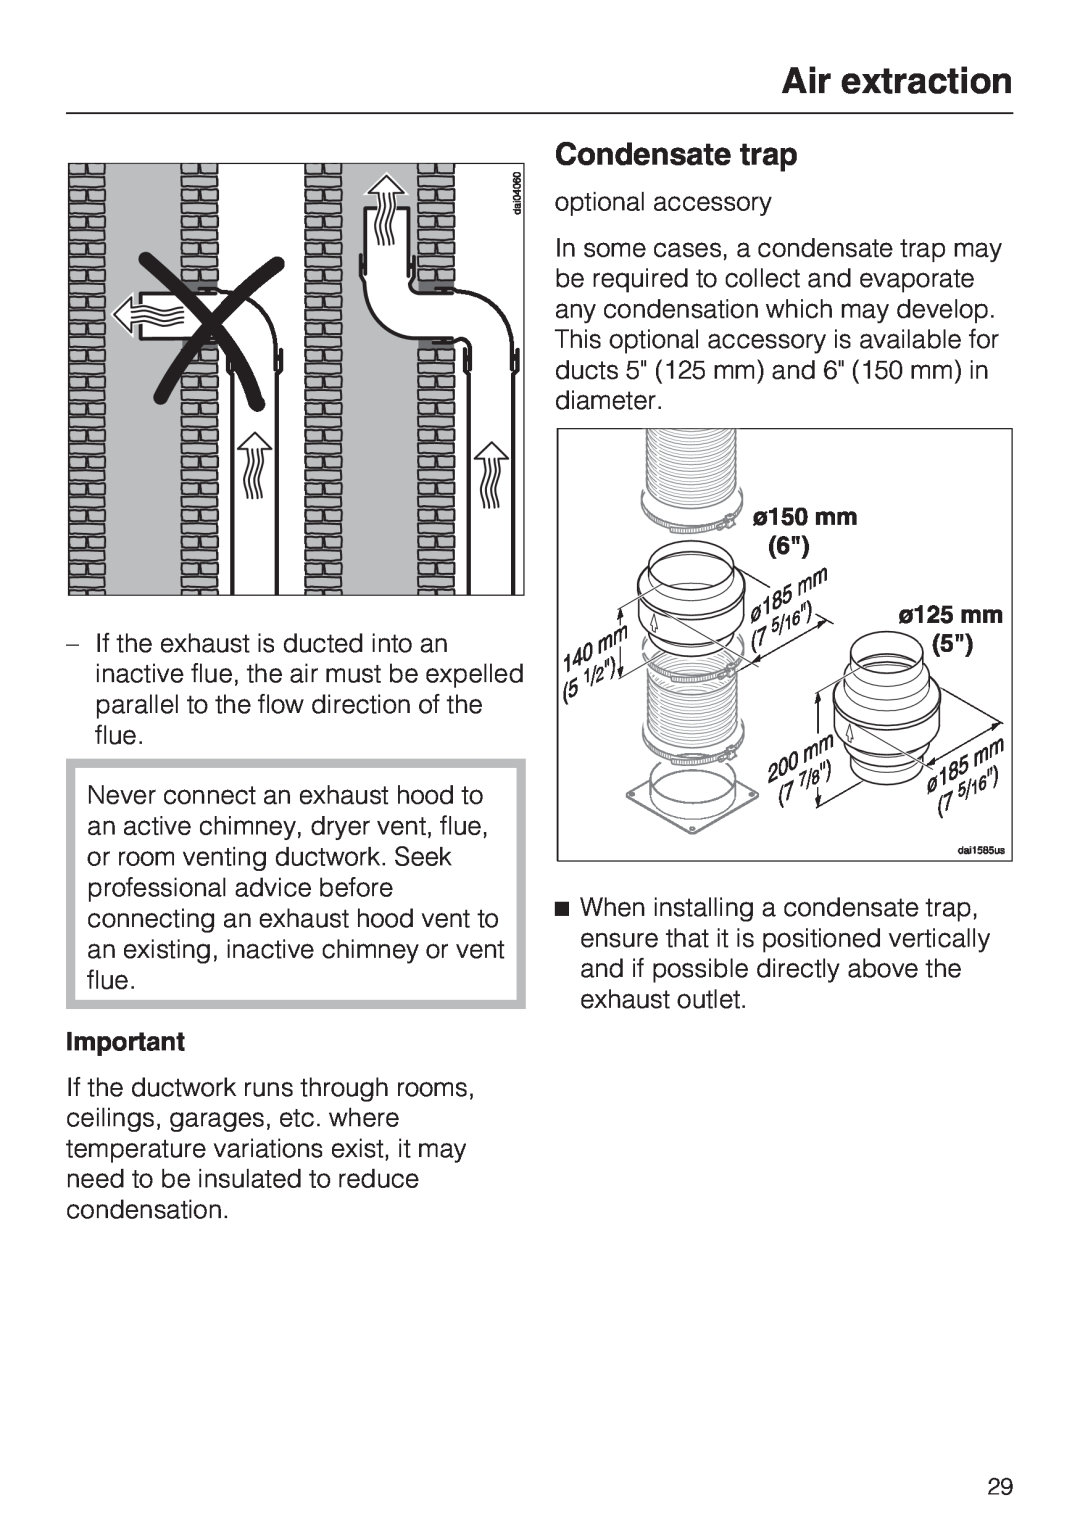 Miele DA 270-4, ventilation system installation instructions Condensate trap, Air extraction 